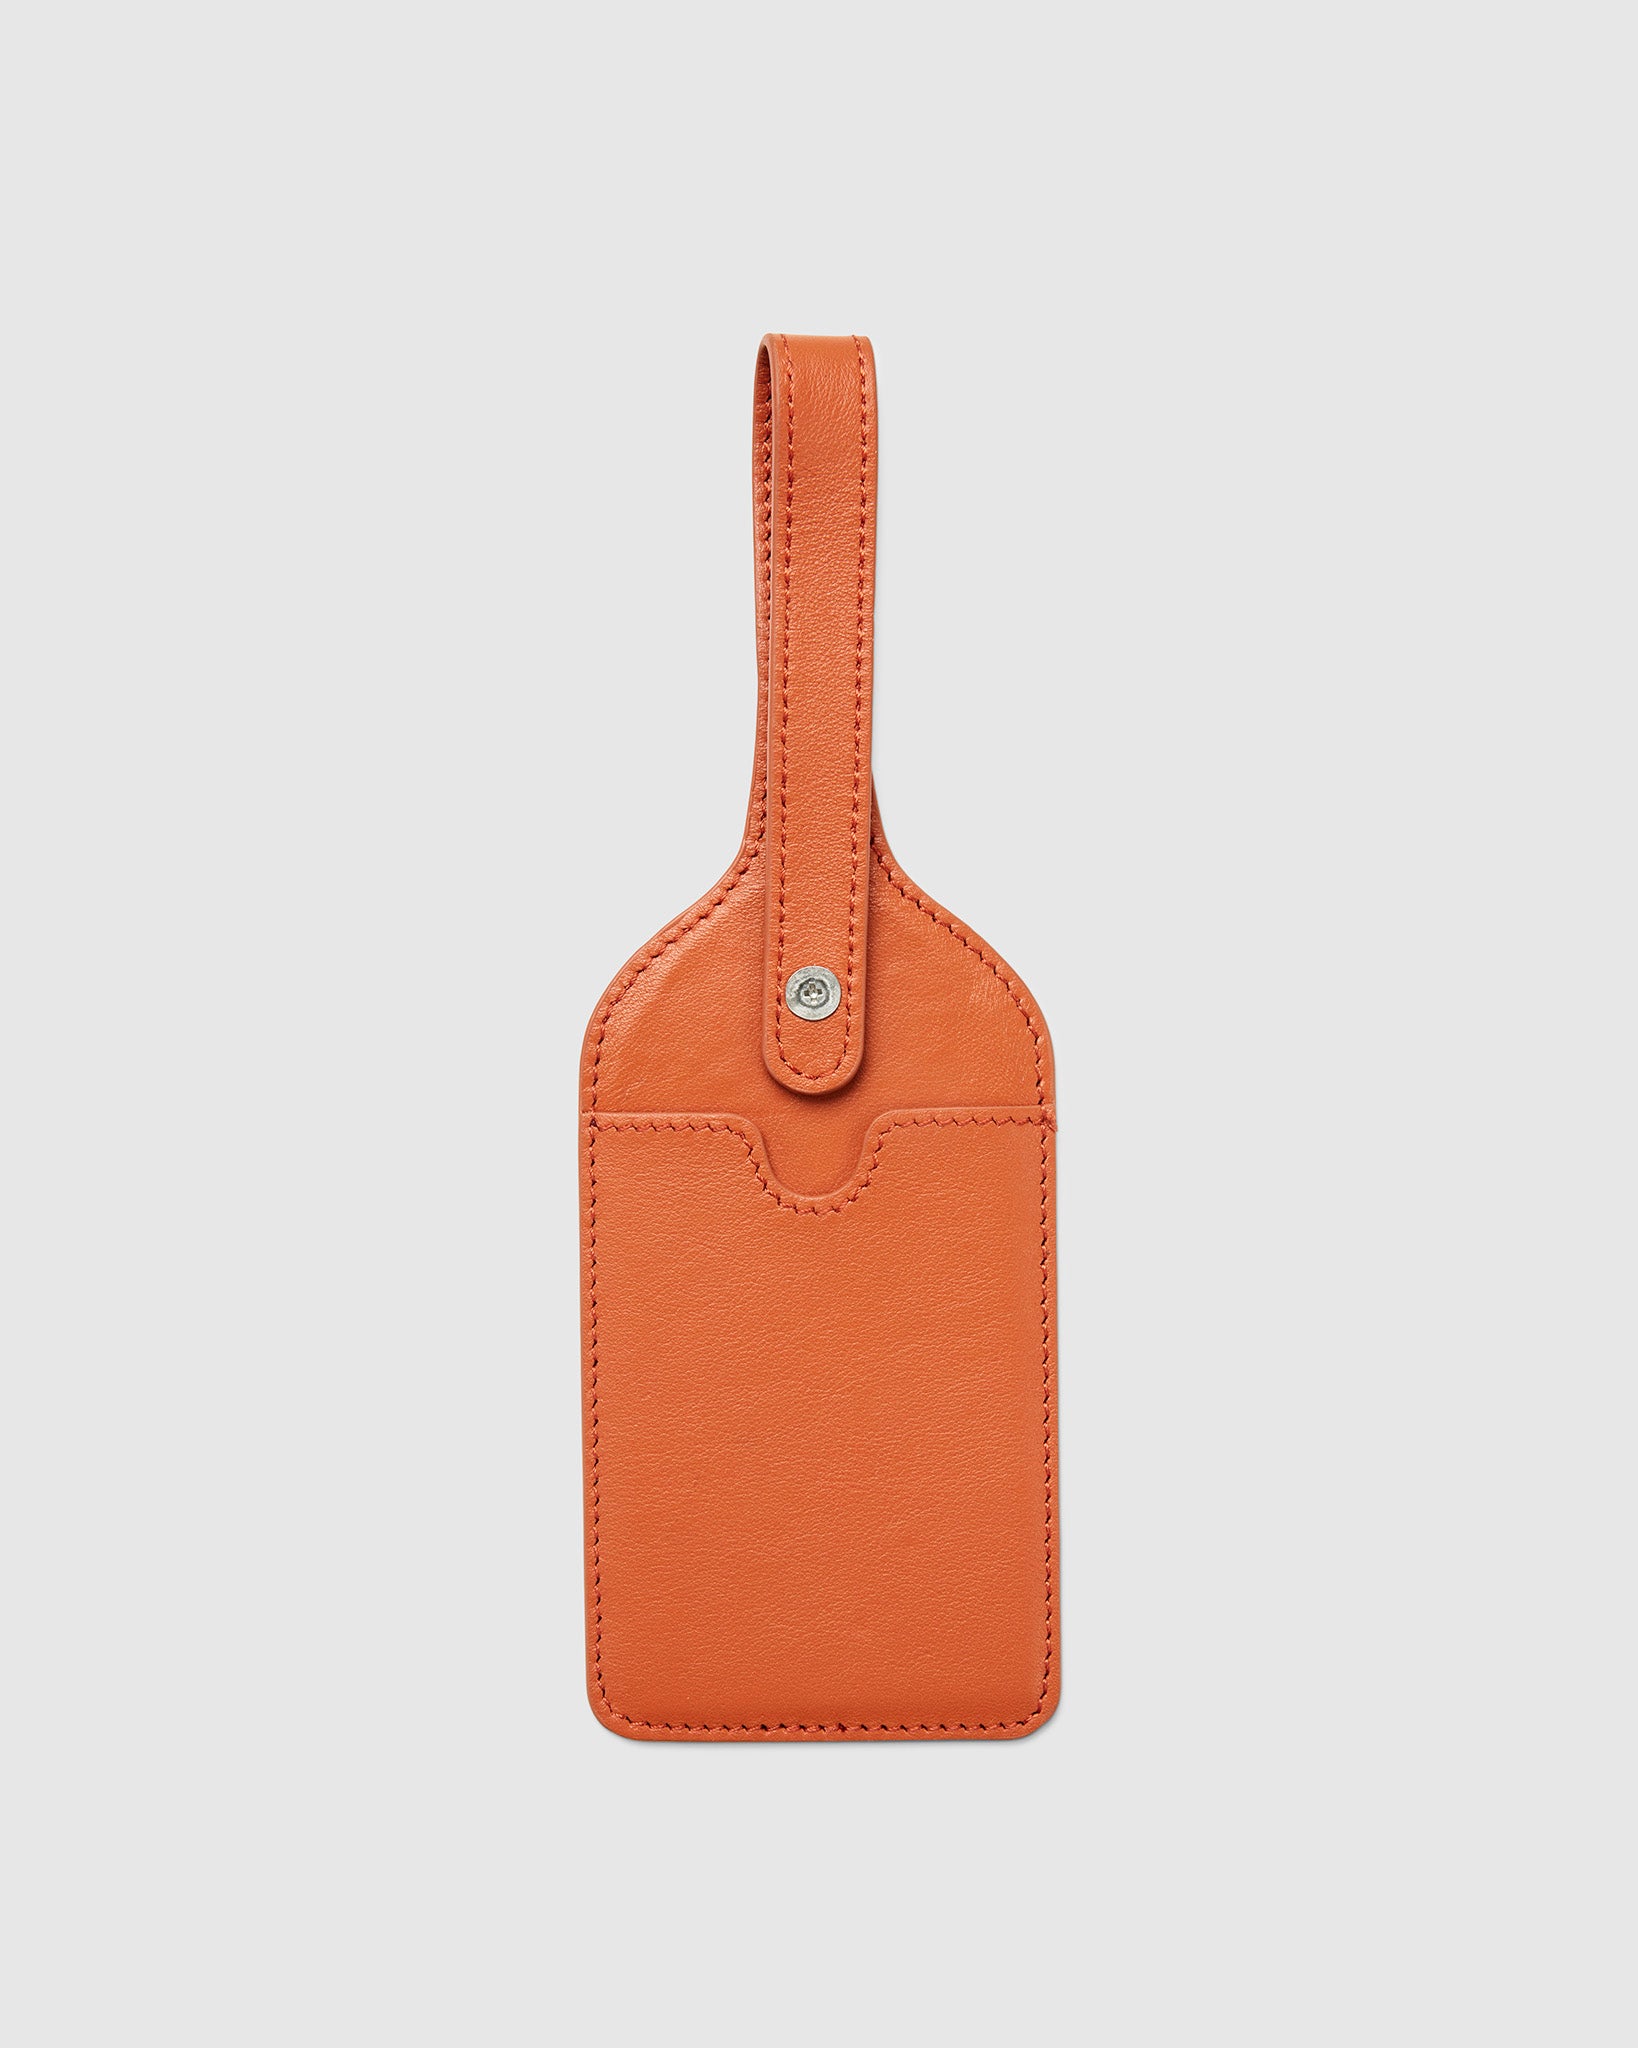 Leather Luggage Tag in Squash